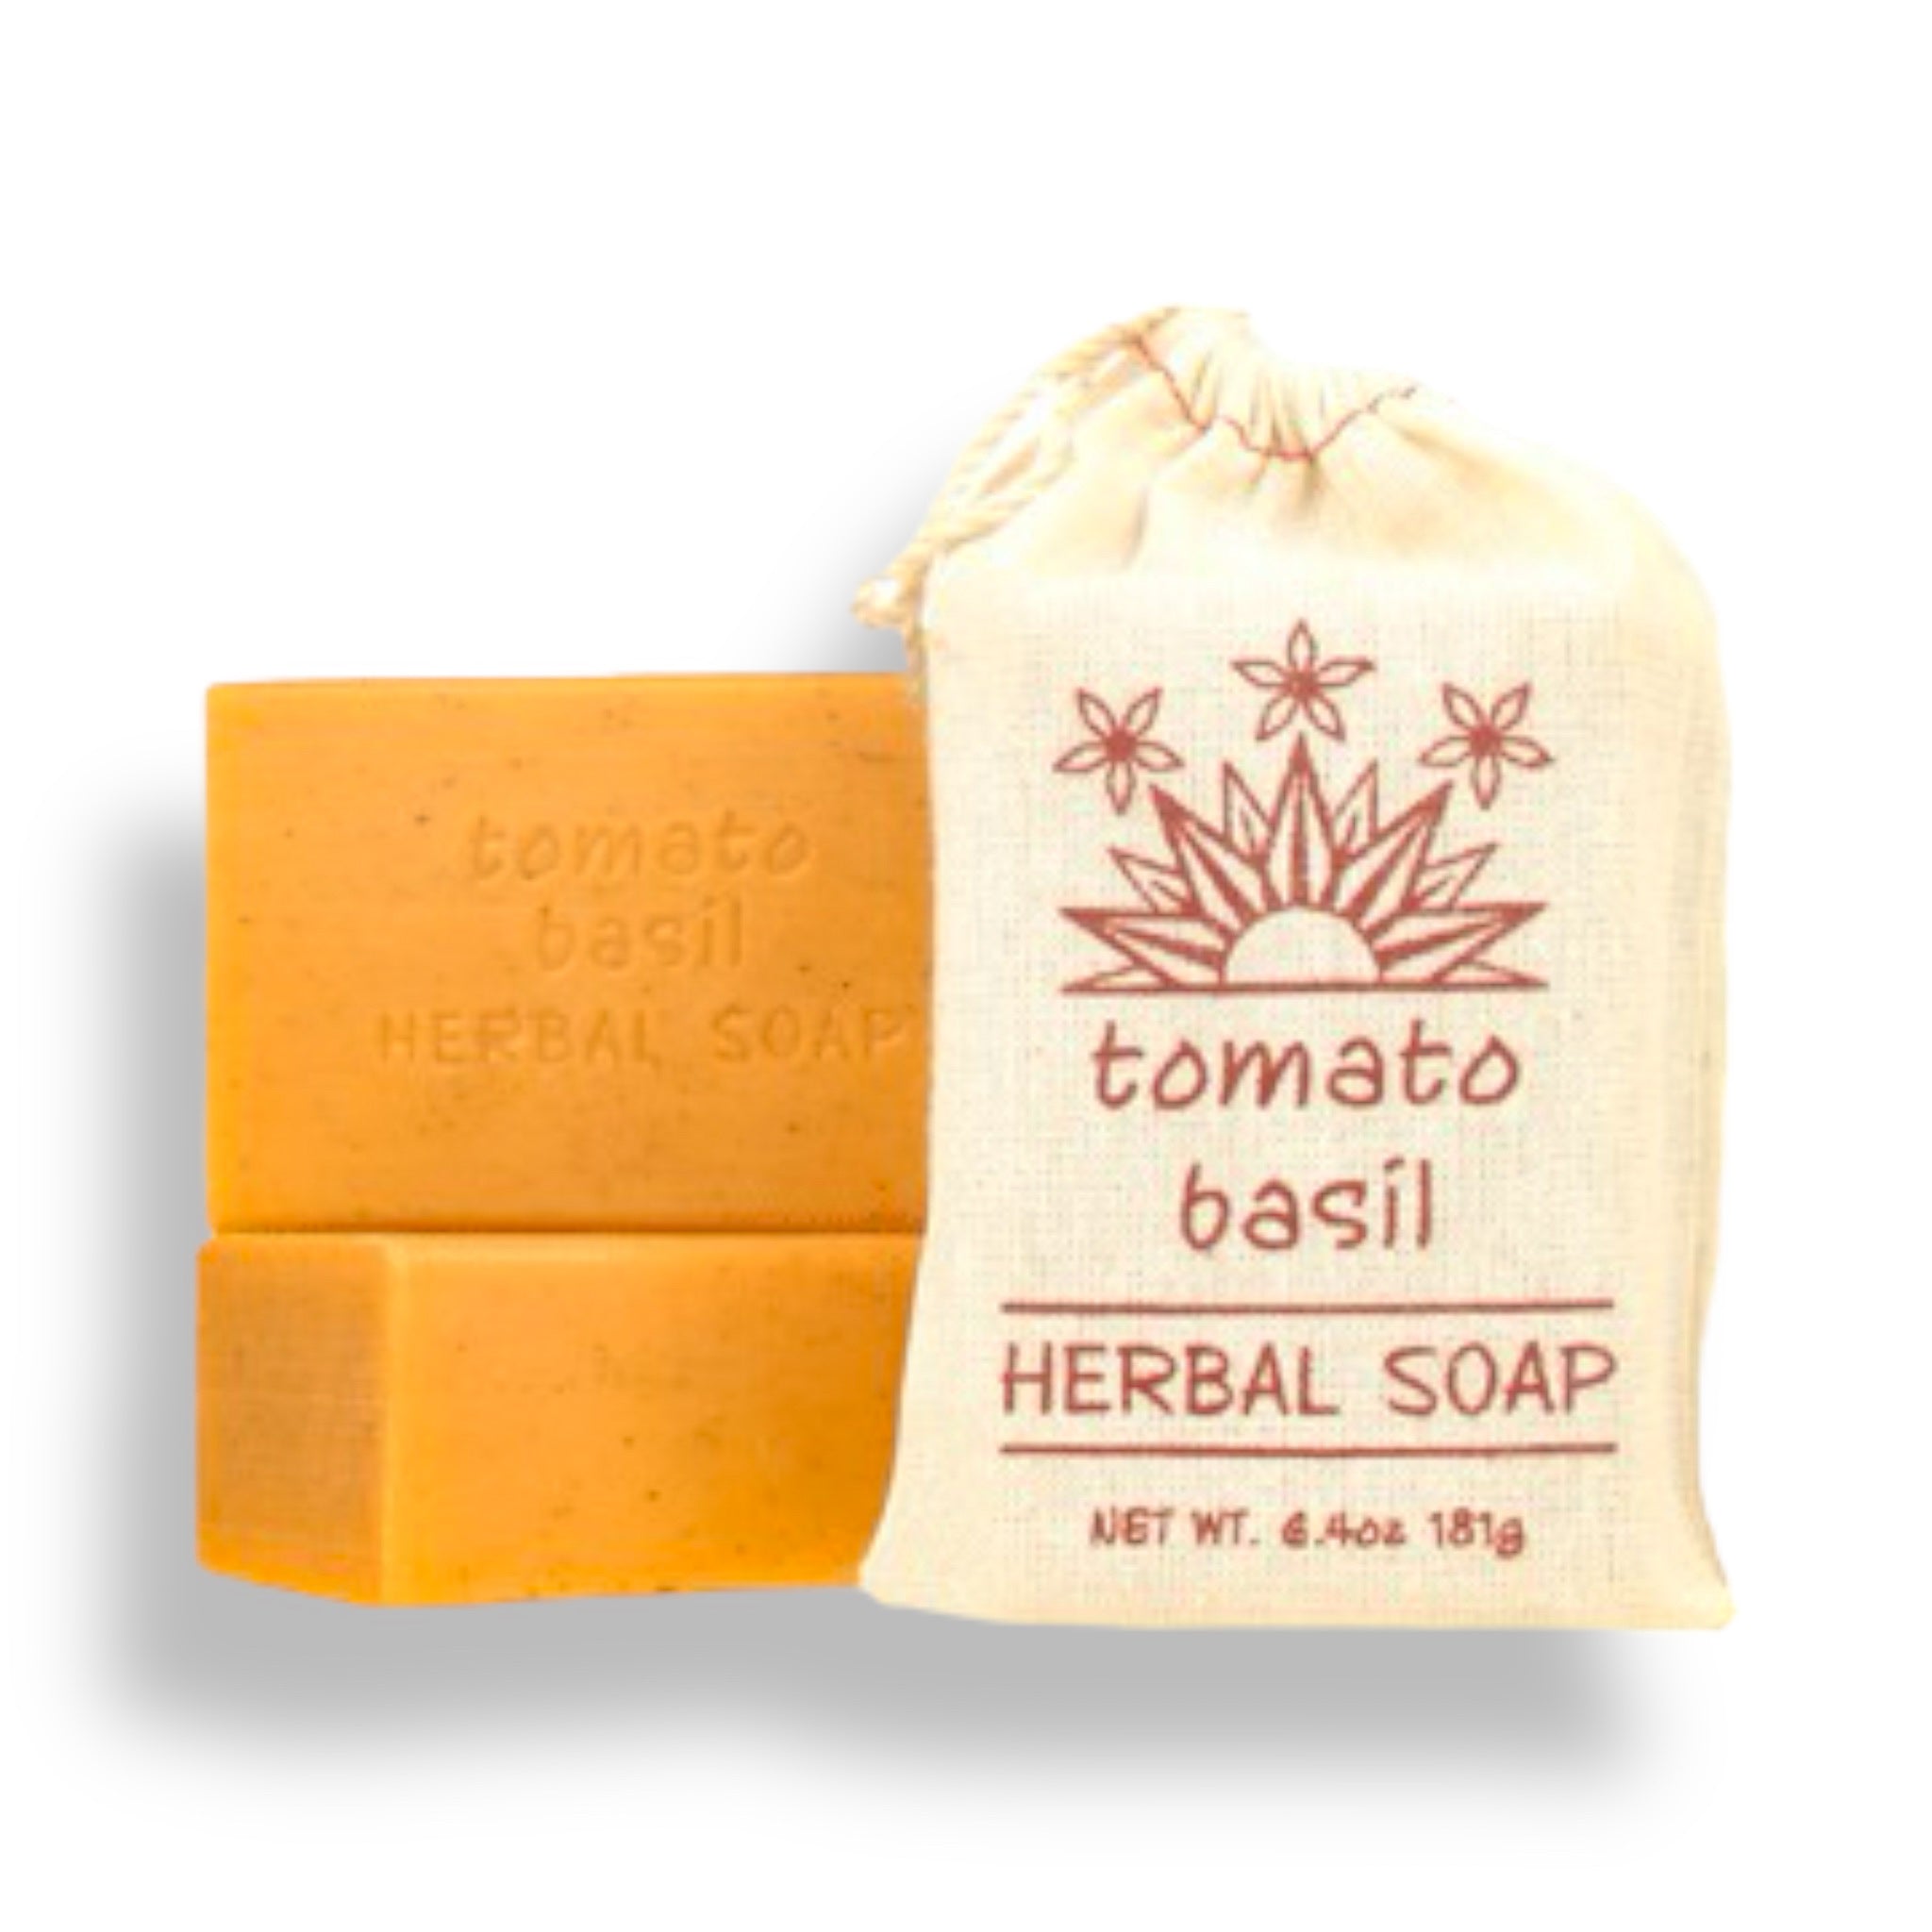 TOMATO BASIL Exfoliating Soap - Herbal Collection - Greenwich Bay Trading Company 